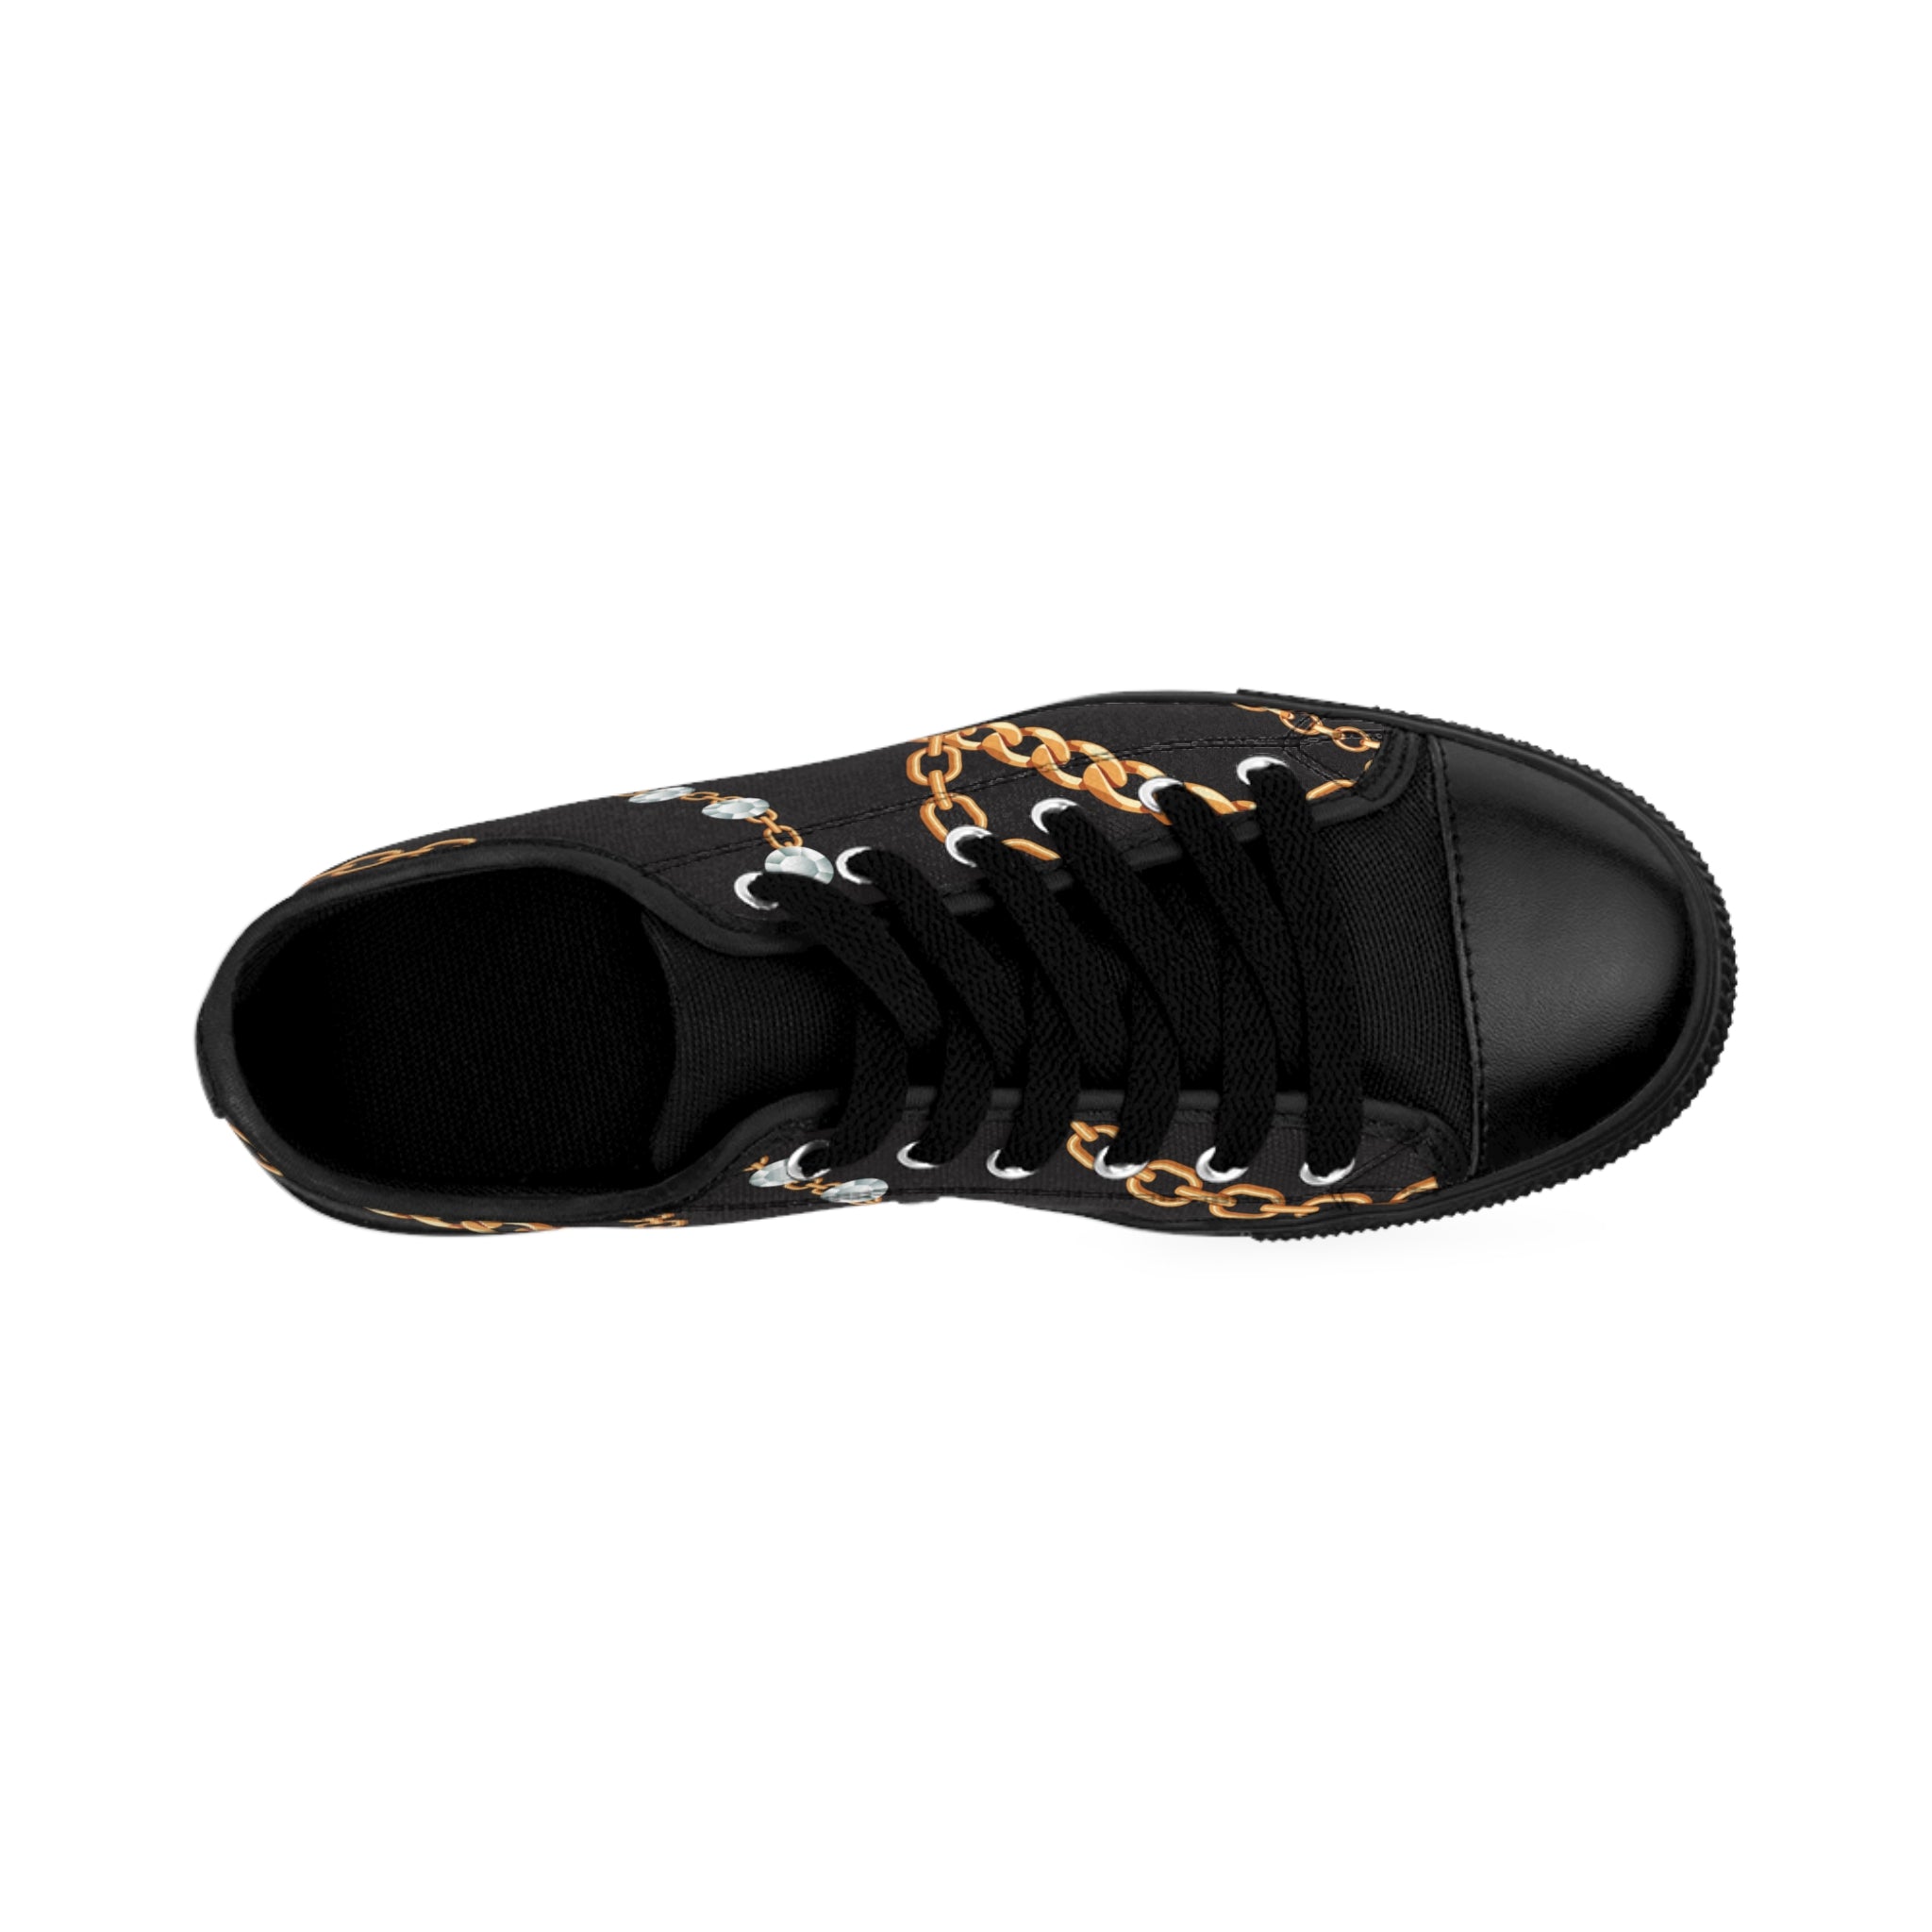 Designer Collection (Chains + Diamonds) Black Women's Low Top Canvas Shoes Shoes  The Middle Aged Groove